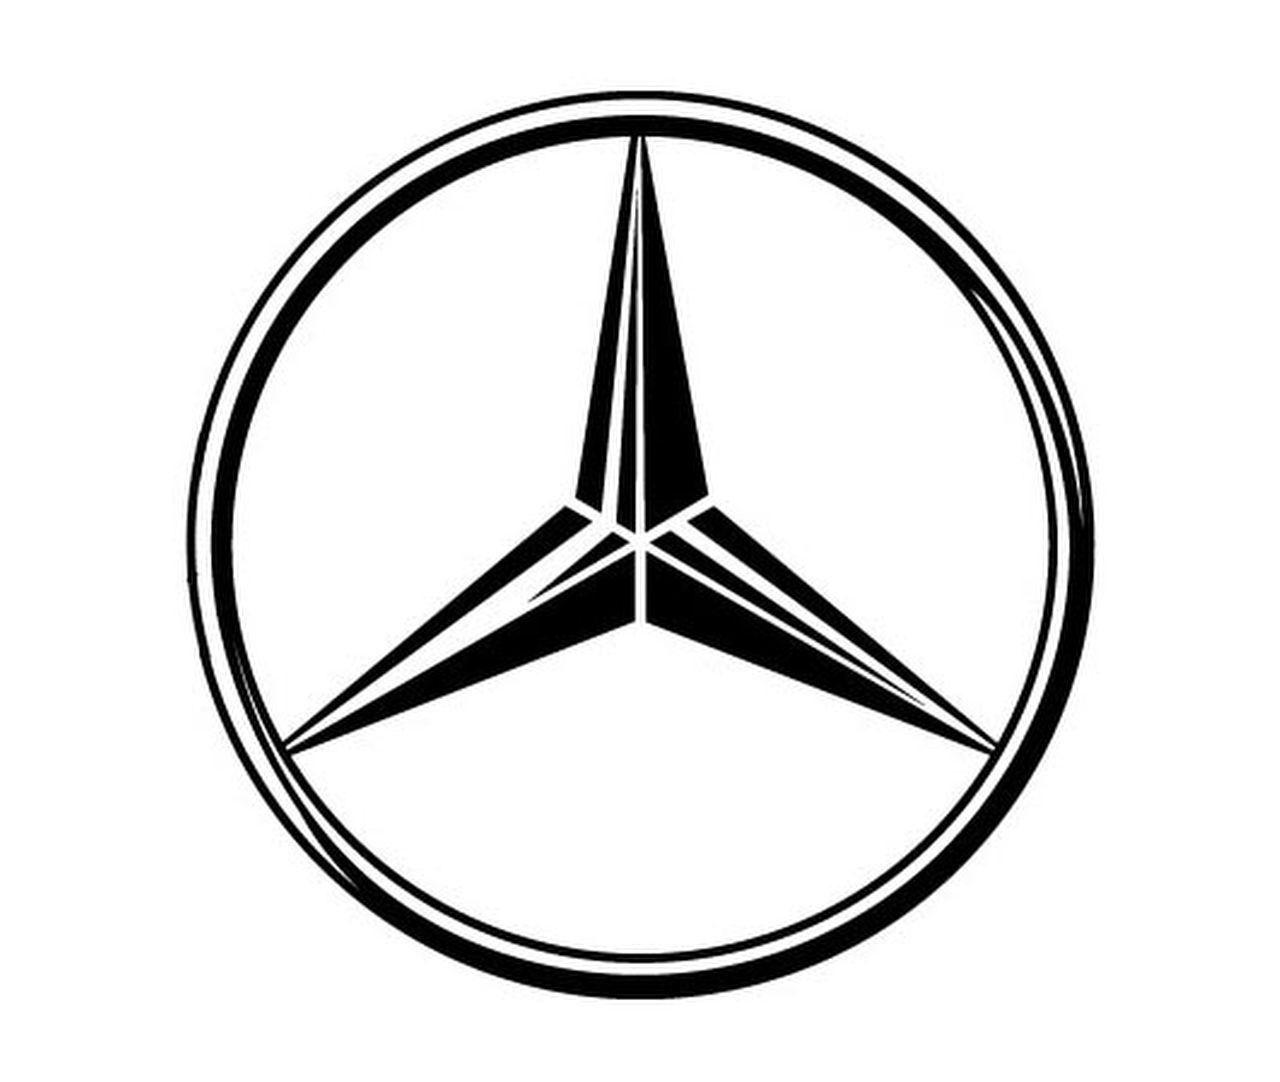 Triangle in Circle Company Logo - Mercedes Logo, Mercedes Benz Car Symbol Meaning And History. Car